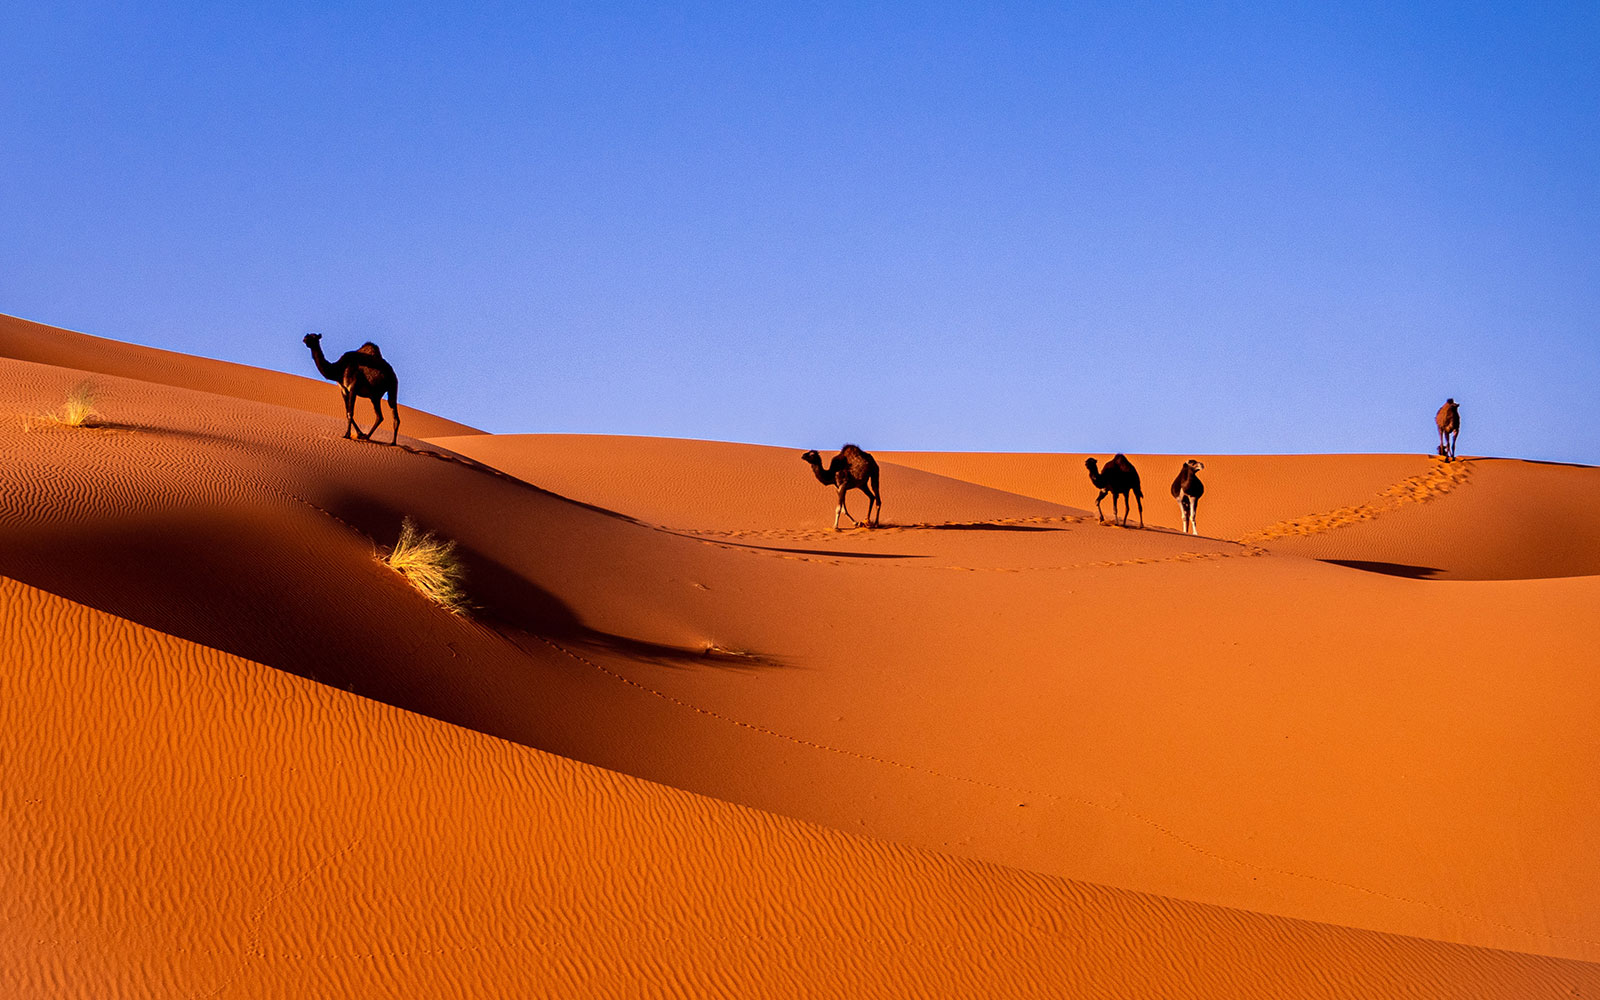 Is camel milk the next superfood